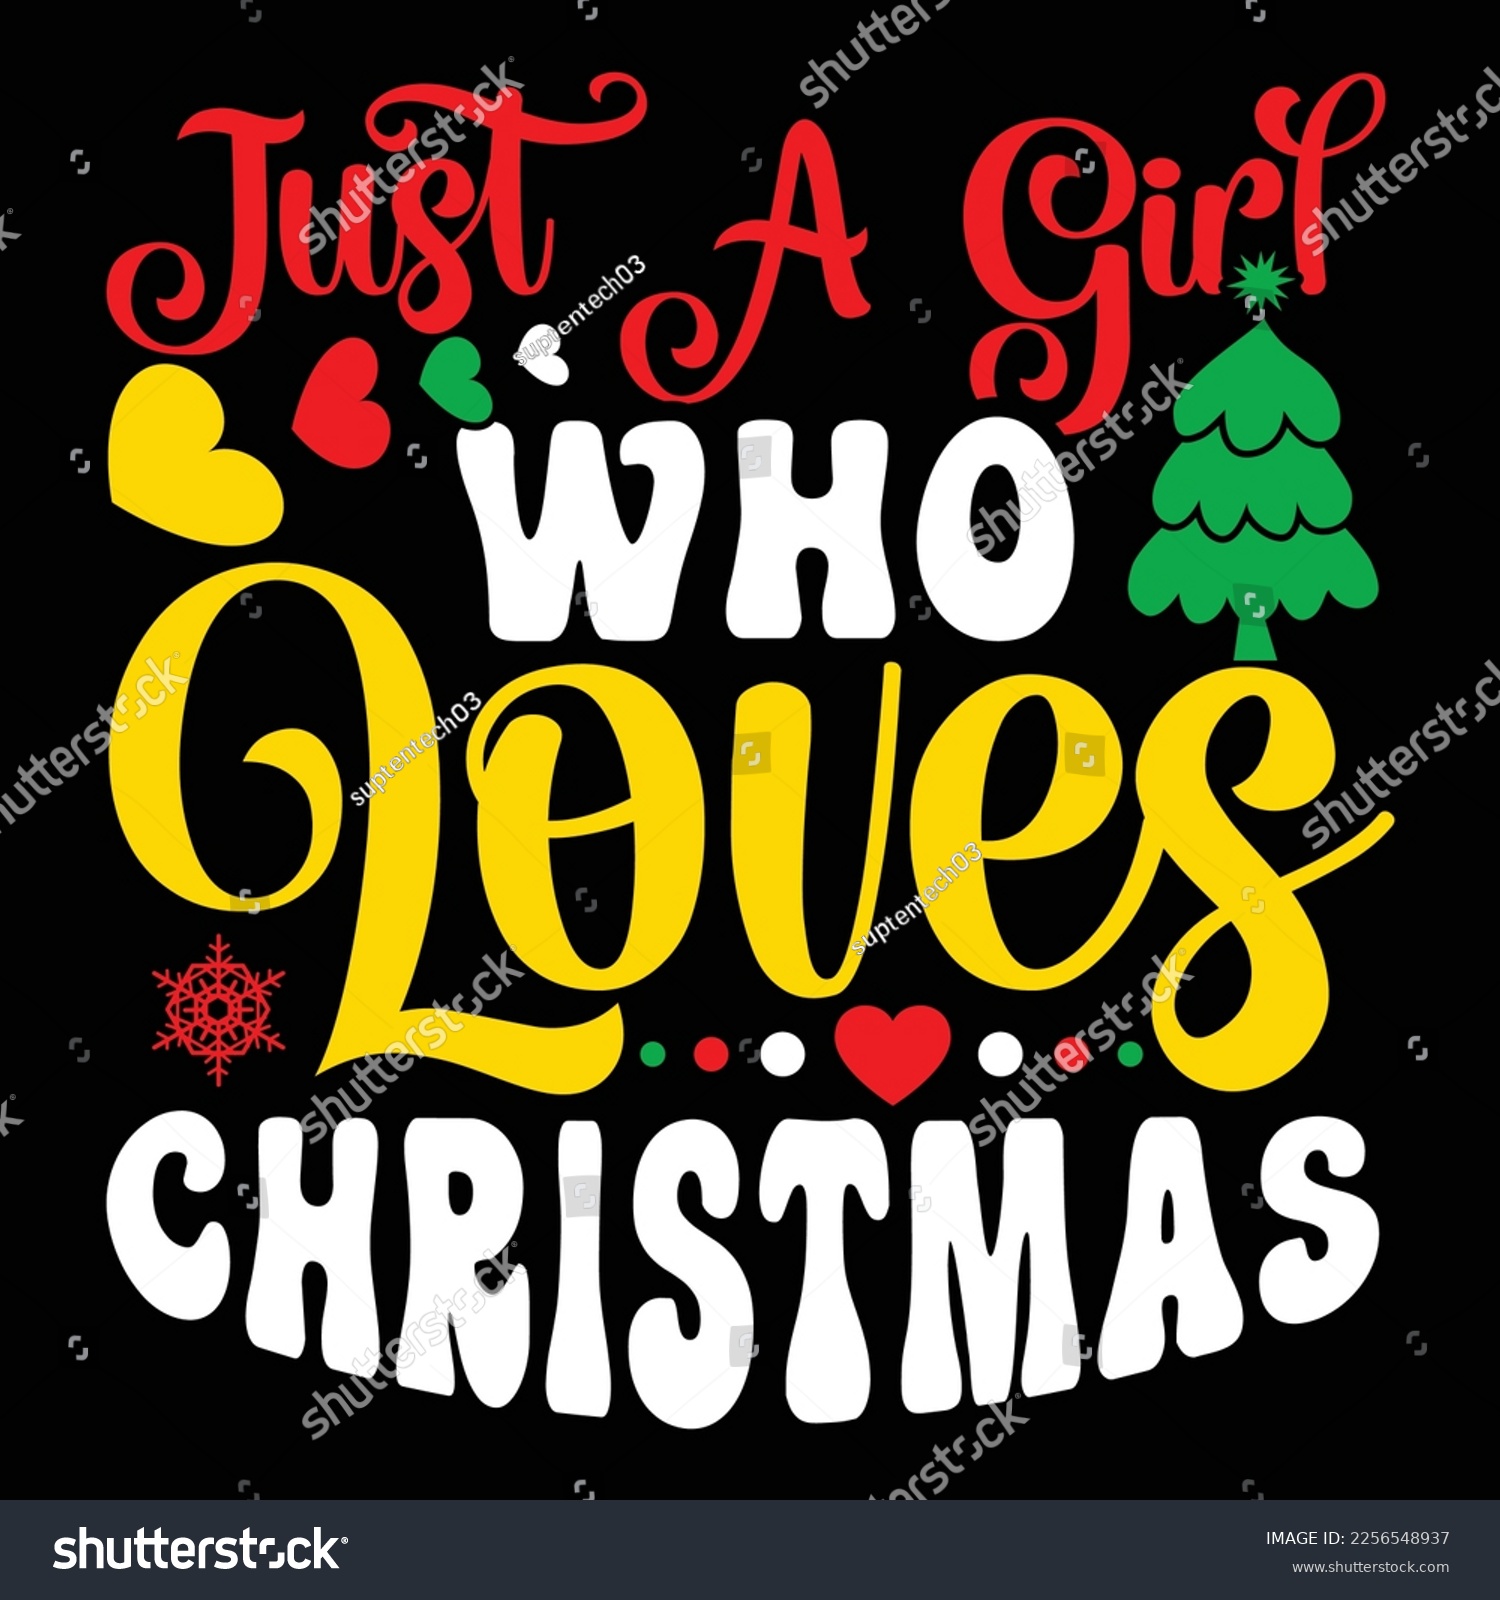 SVG of Just A Girl Who Loves Christmas, Merry Christmas shirts Print Template, Xmas Ugly Snow Santa Clouse New Year Holiday Candy Santa Hat vector illustration for Christmas hand lettered svg